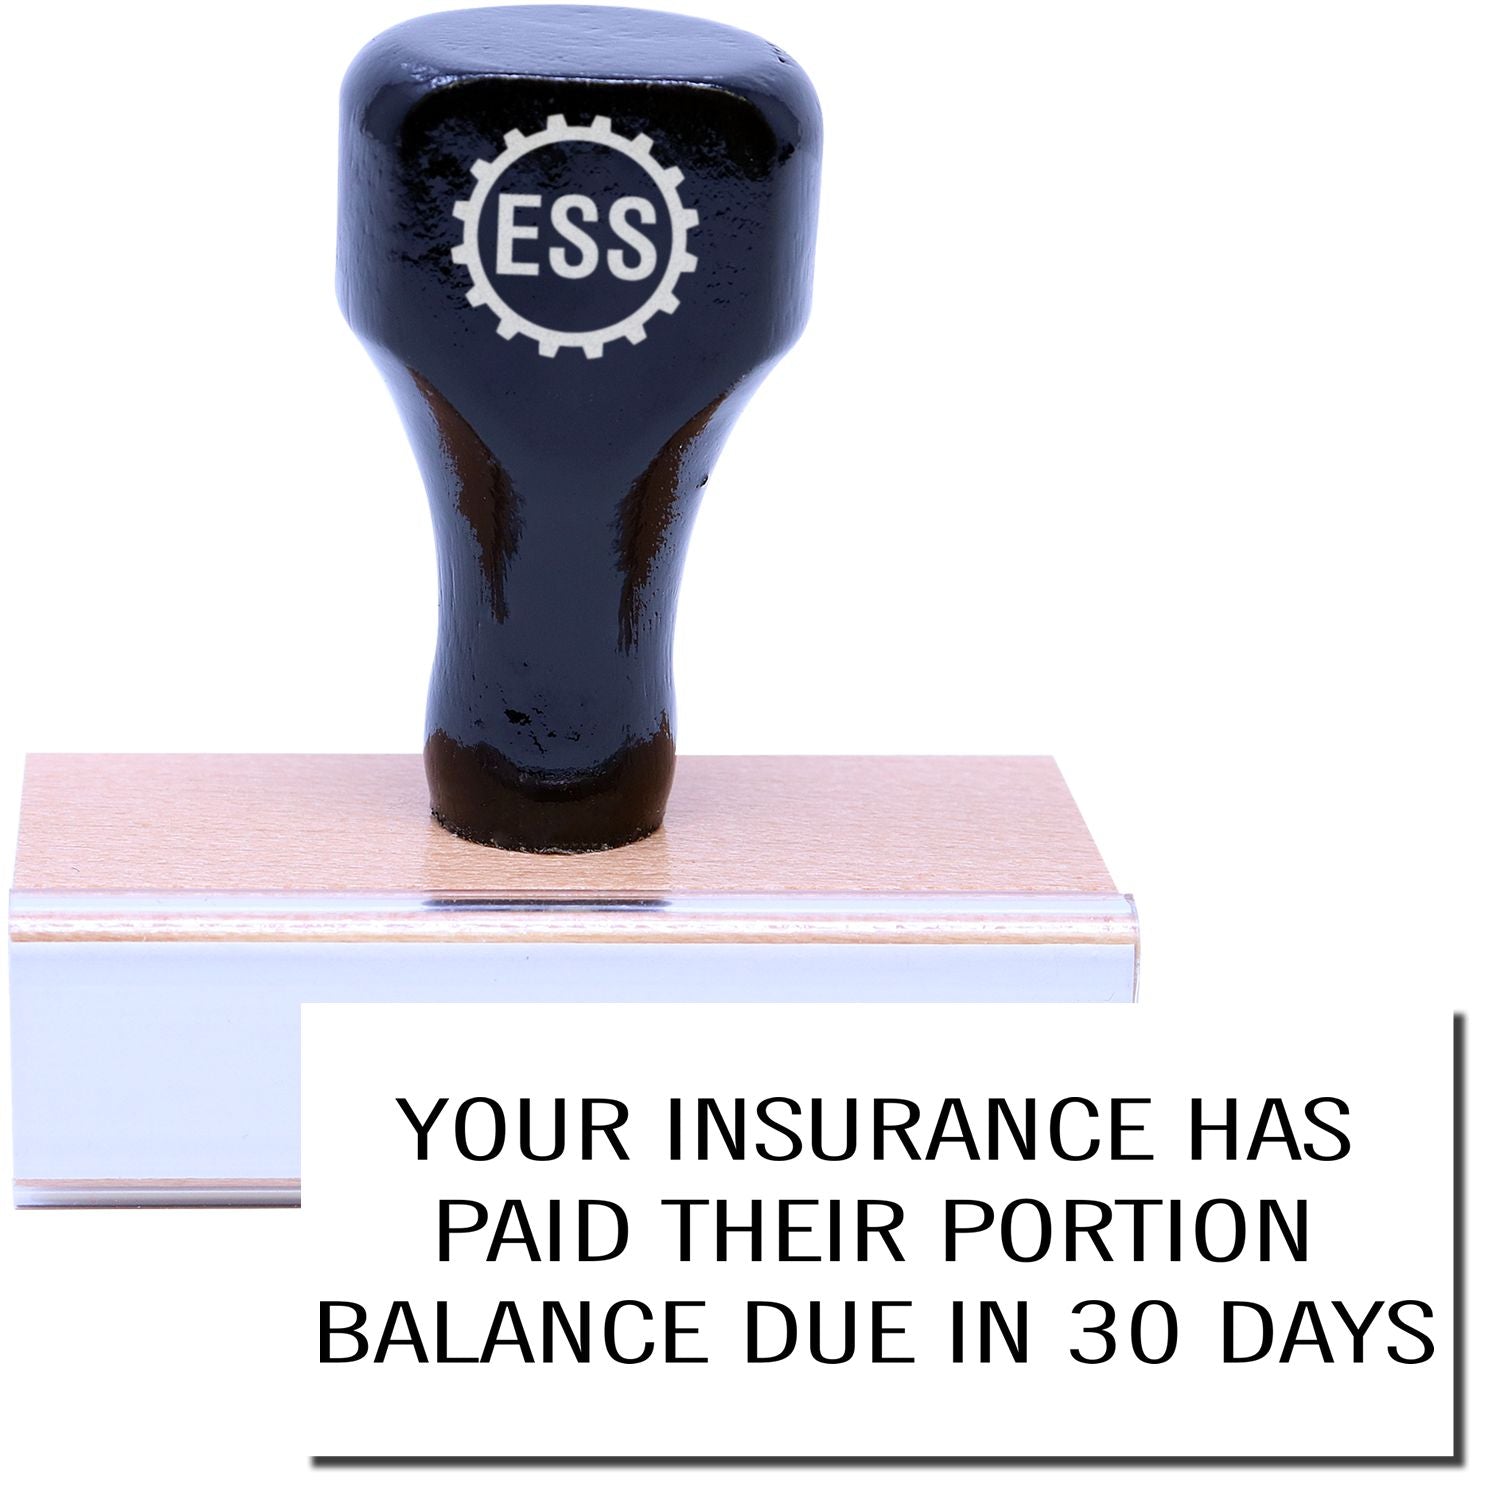 A stock office rubber stamp with a stamped image showing how the text "YOUR INSURANCE HAS PAID THEIR PORTION BALANCE DUE IN 30 DAYS" in a large font is displayed after stamping.